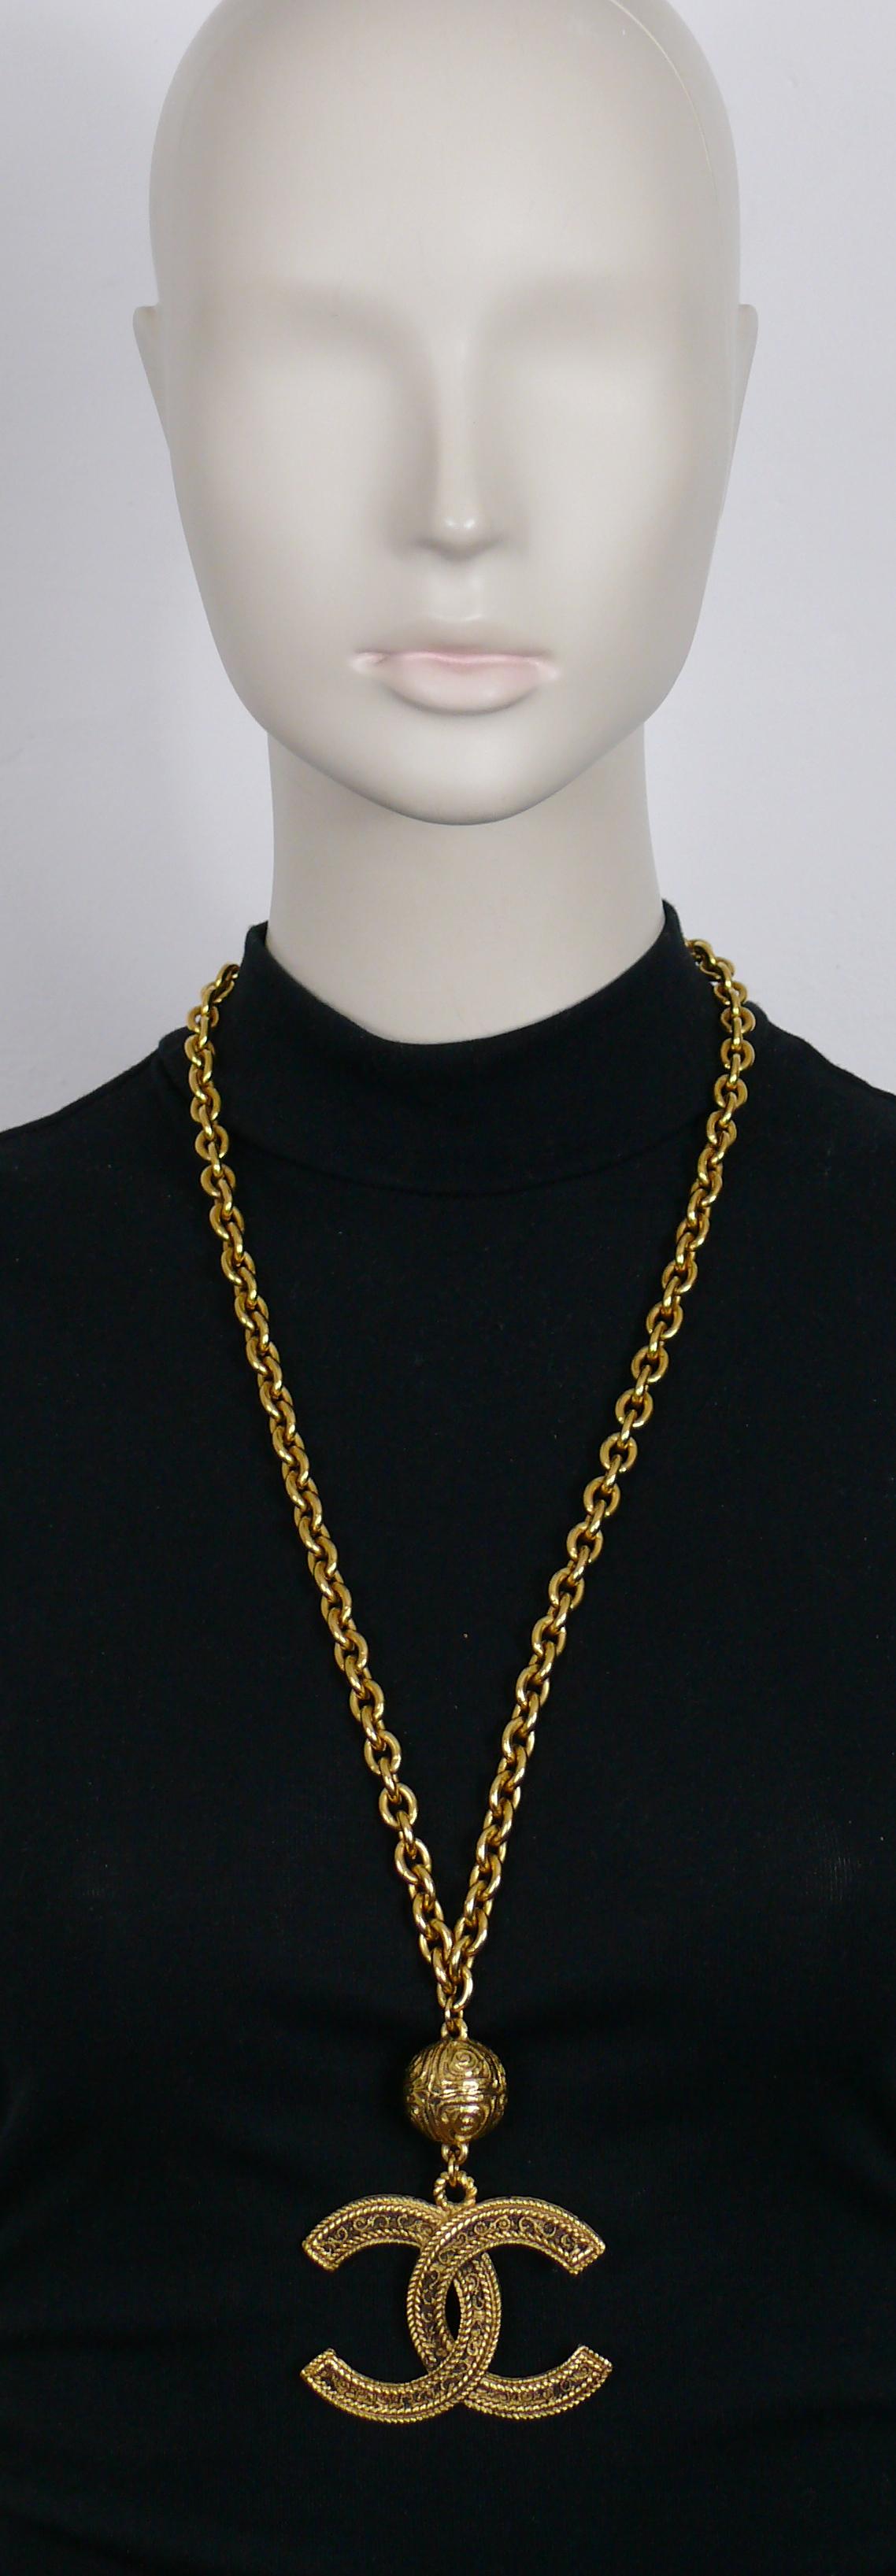 CHANEL vintage chunky gold tone chain necklace featuring a massive antiqued gold tone CC logo pendant.

Spring clasp closure.

Embossed CHANEL 1985 Made in France on a metal tag (near the clasp).
Embossed CHANEL and reference number (unreadable) on